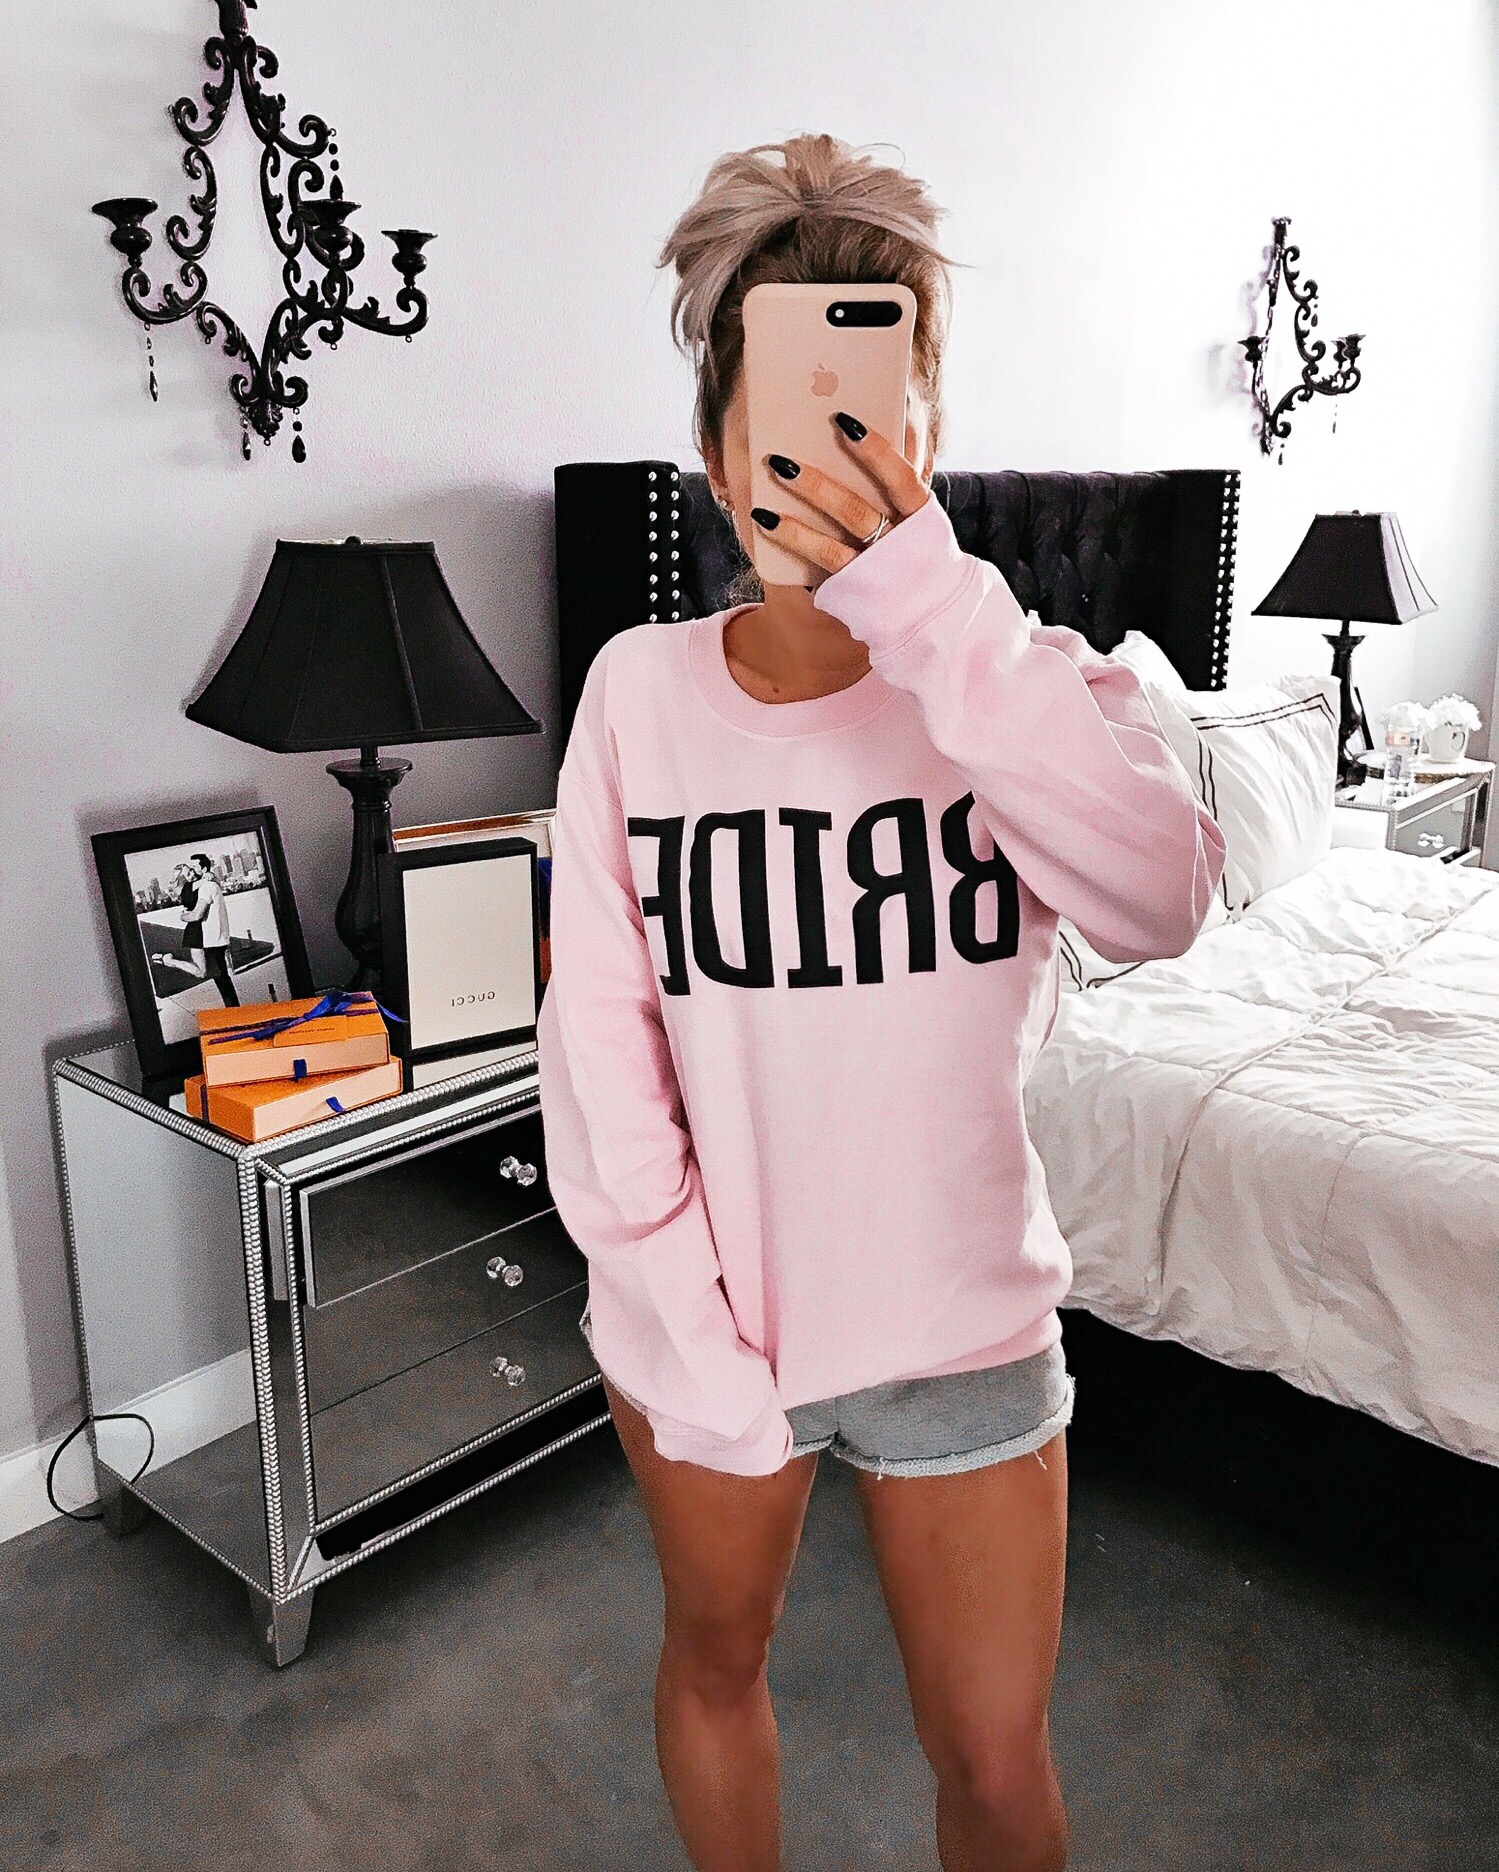 Pink Sweatshirt for the Bride |by Blondie in the City